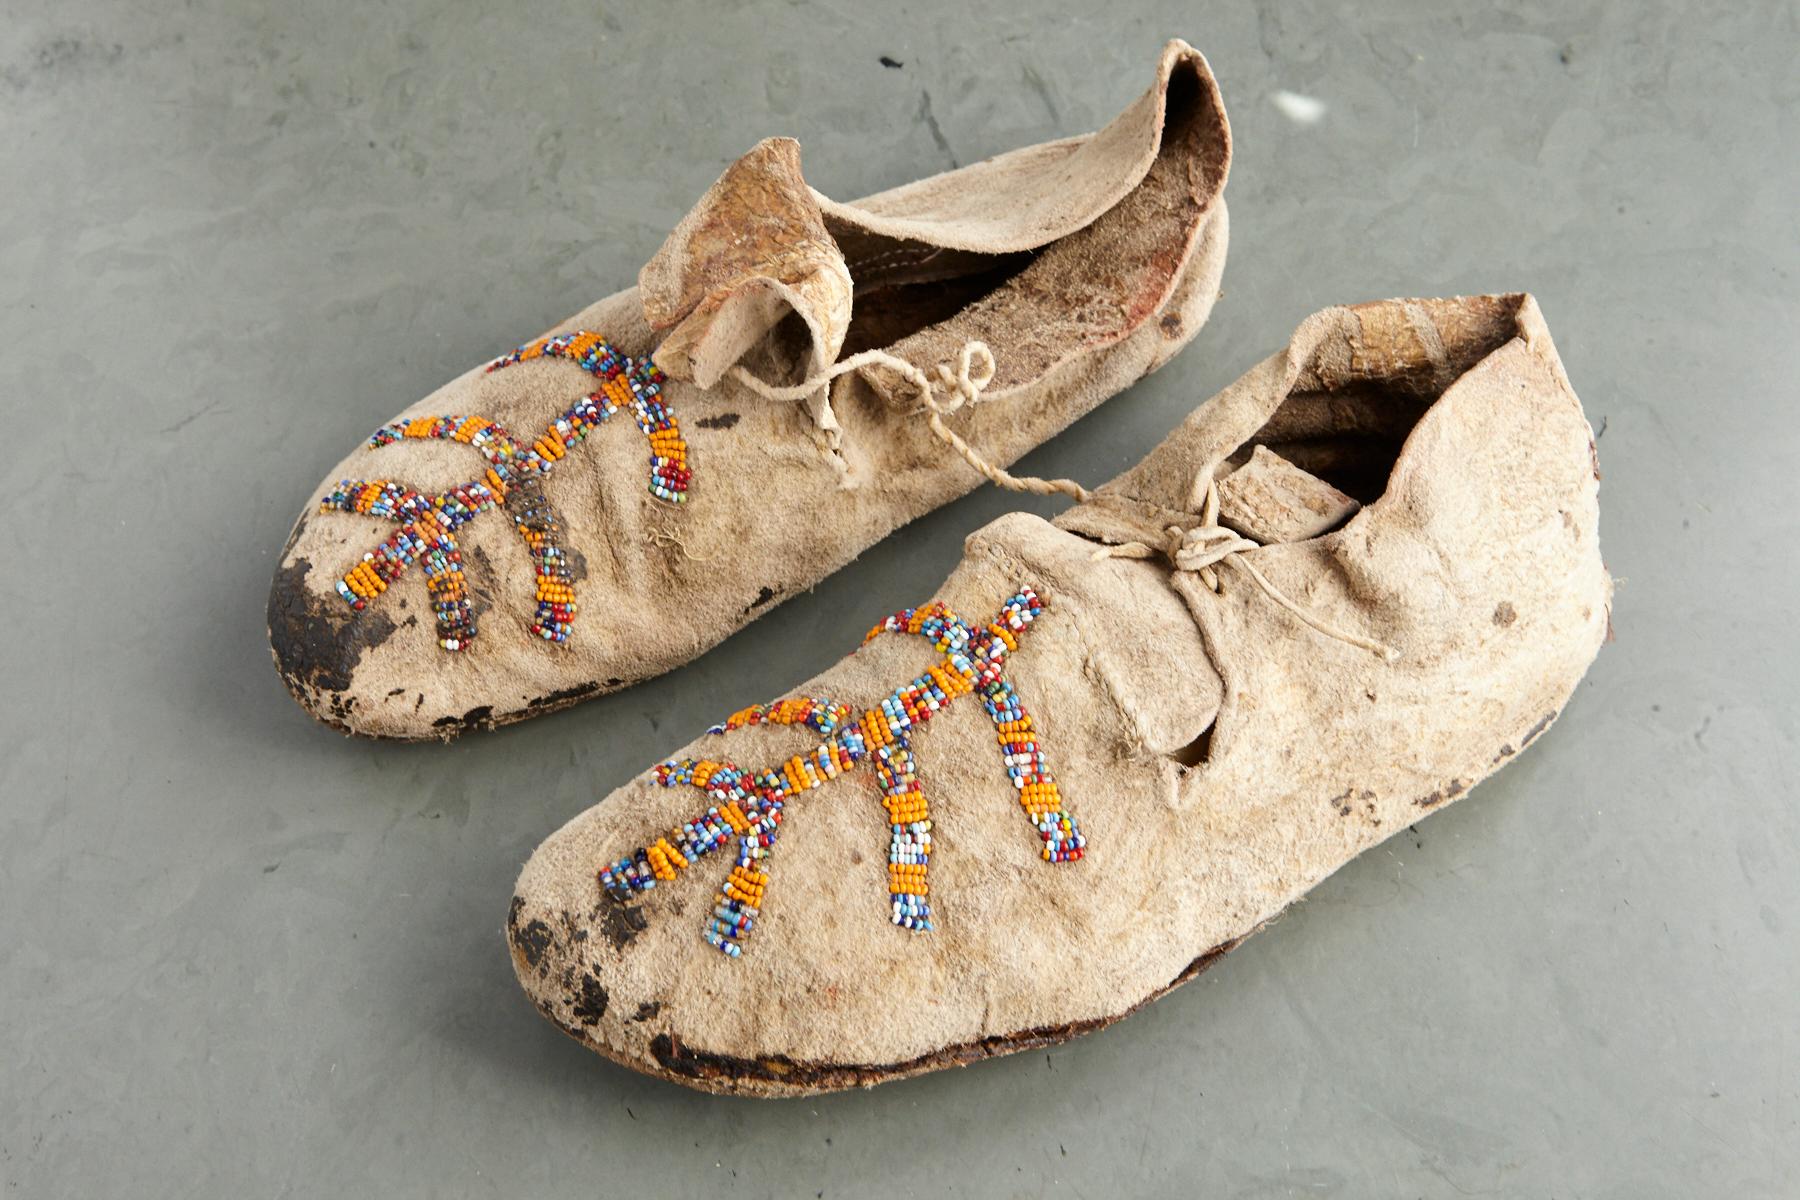 Pair of 1930s vintage Sioux made adult buckskin moccasins with old beads, note the unique colors.
A great High Plains collectible for display.
Bought in the 1970s from the Sioux Museum at the Oglala Sioux Reservation, South Dakota.
There are a